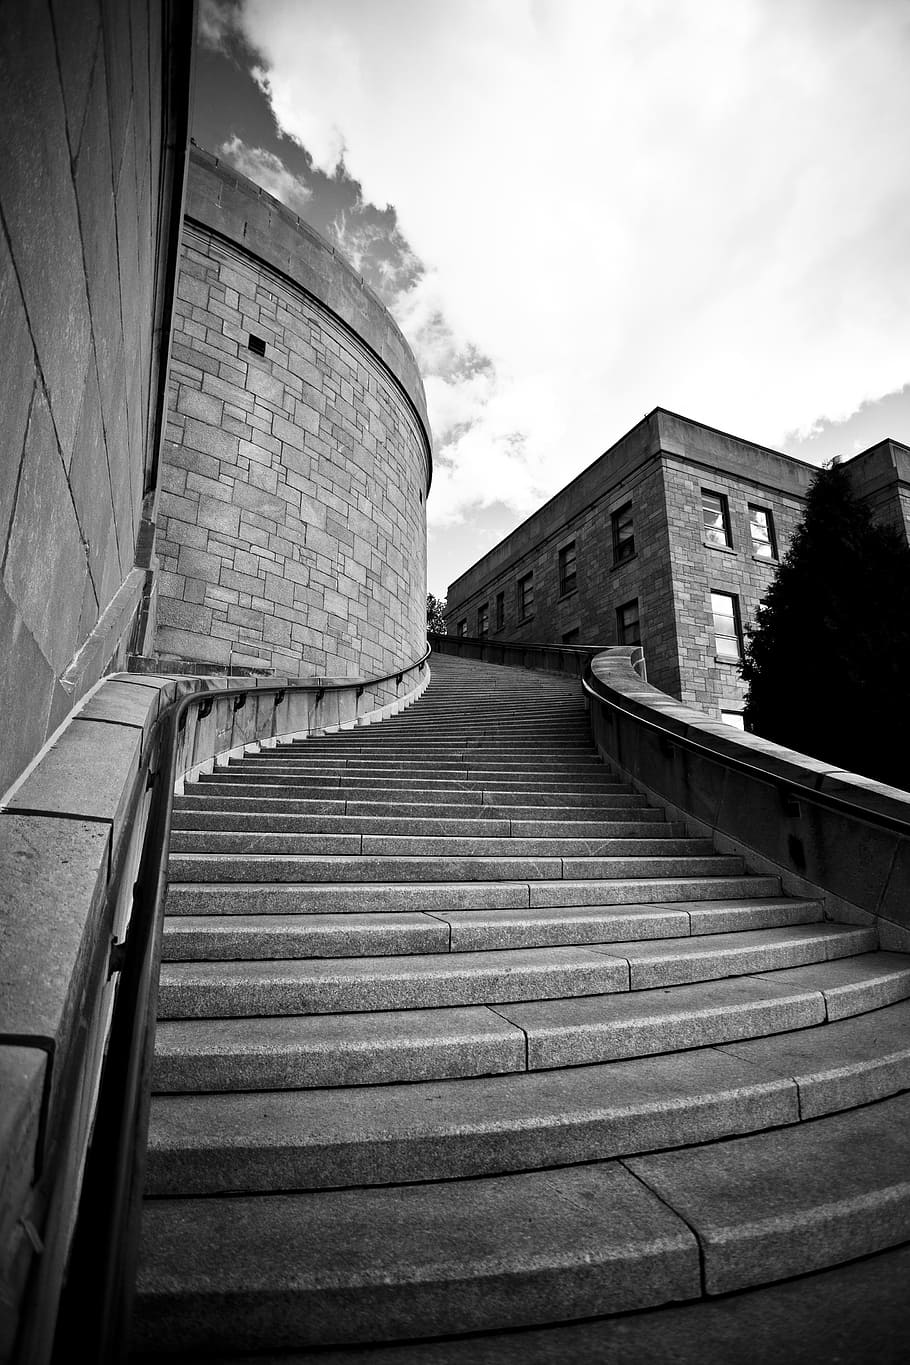 graycale photography, concrete, staircases, stairs, architecture, perspective, black and white, staircase, stairway, design